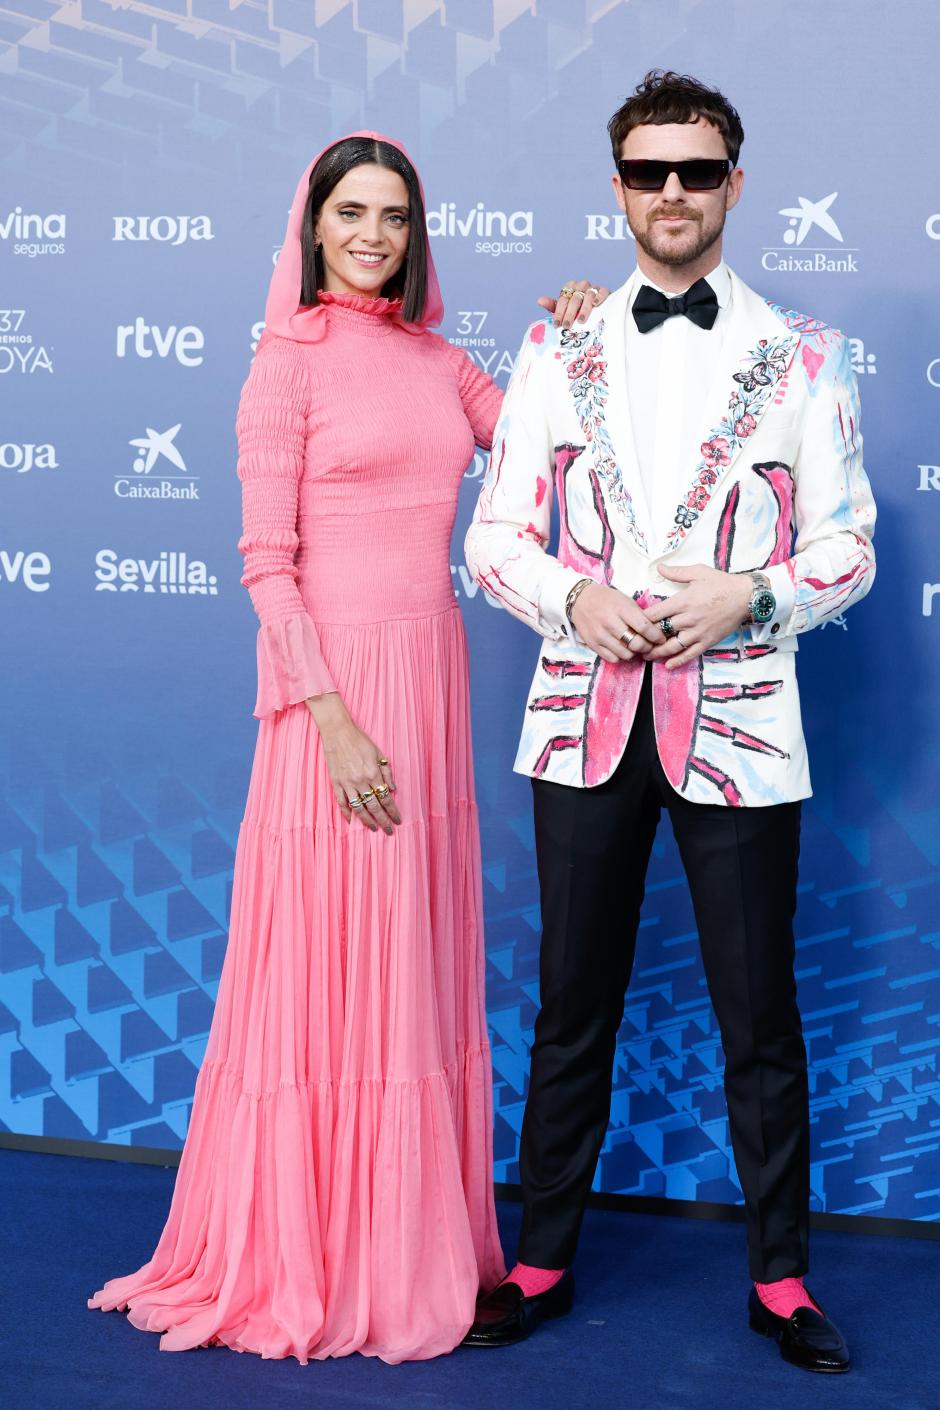 Actress Macarena Gomez and Aldo Gomez at photocall for the 37th annual Goya Film Awards in Sevilla on Saturday 11 February, 2023.